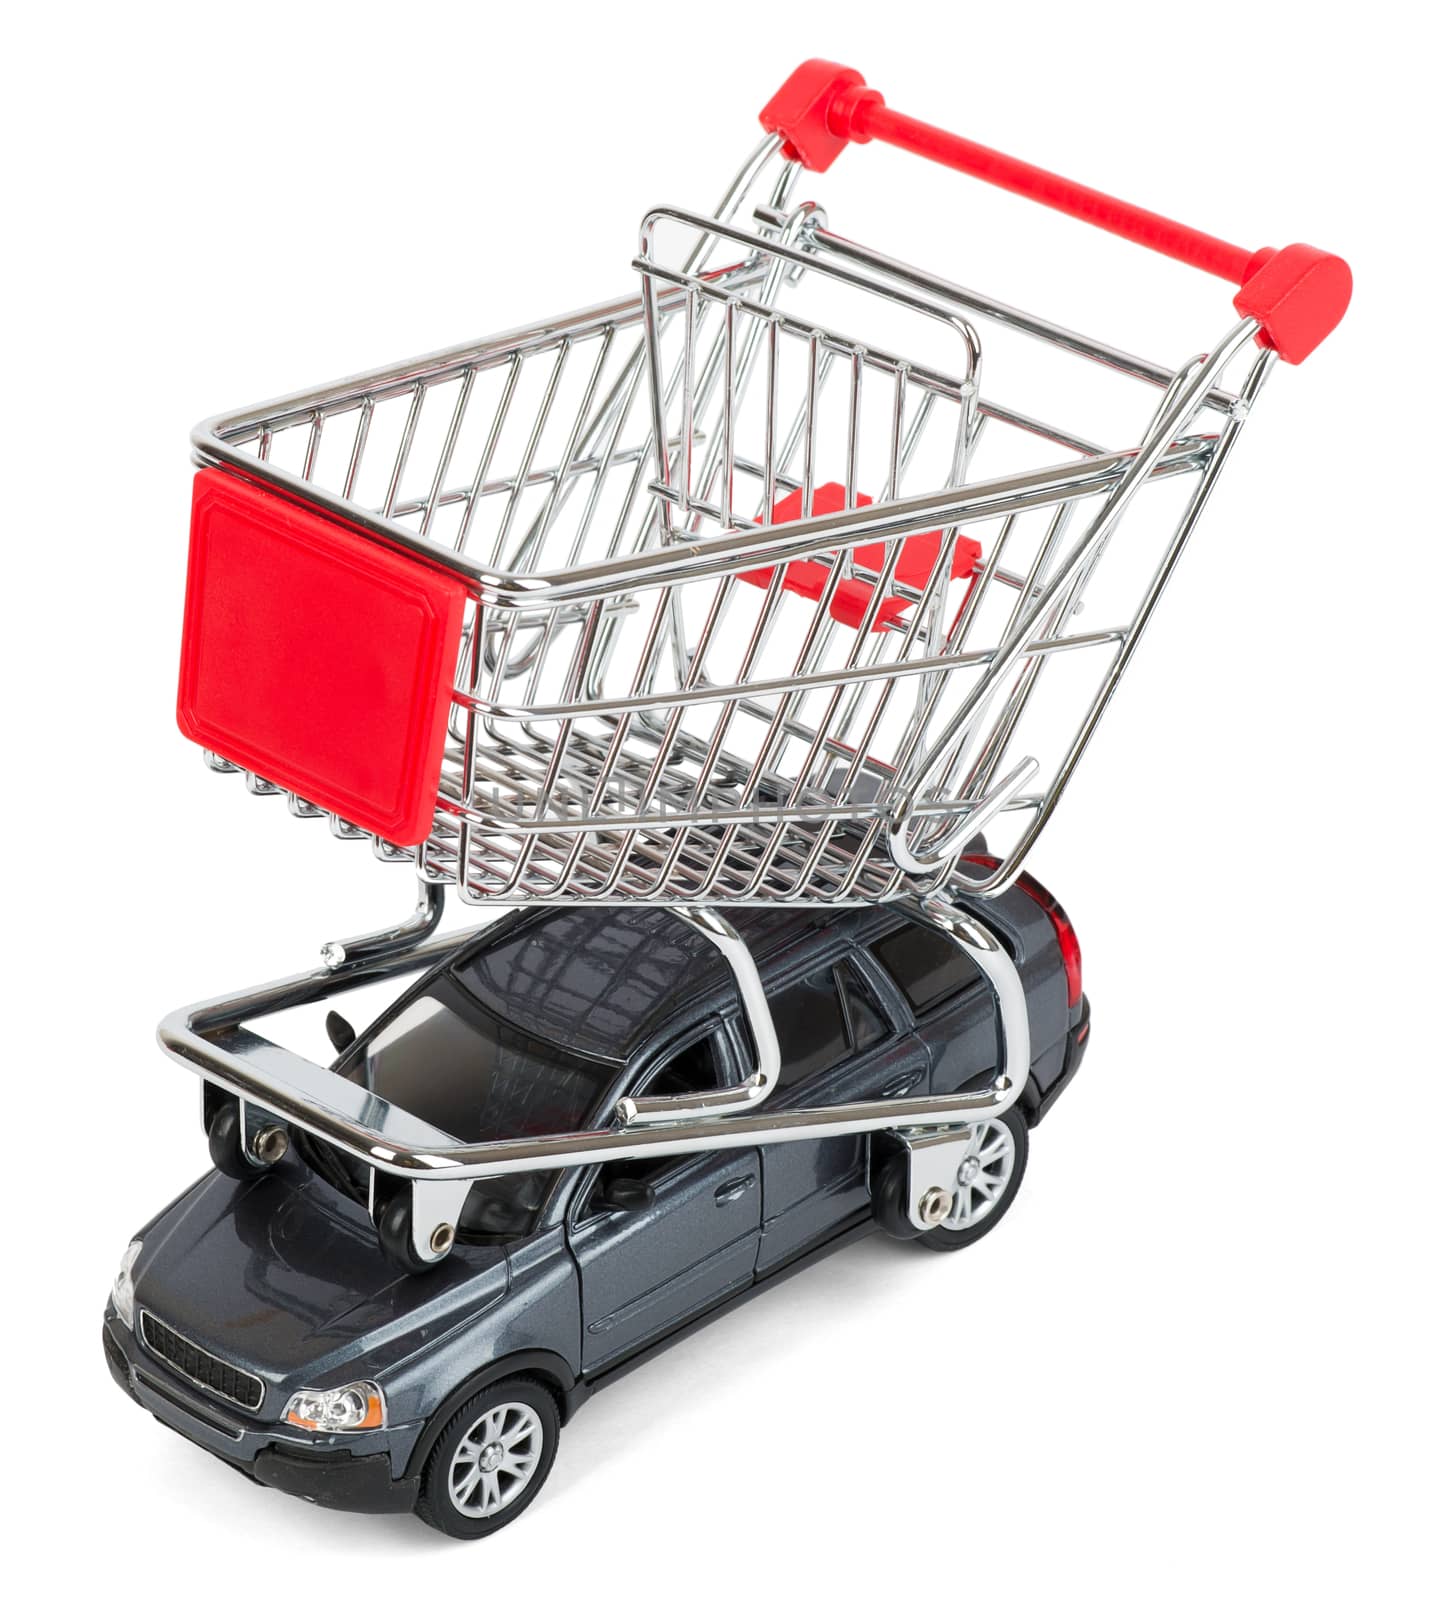 Shopping cart on car by cherezoff